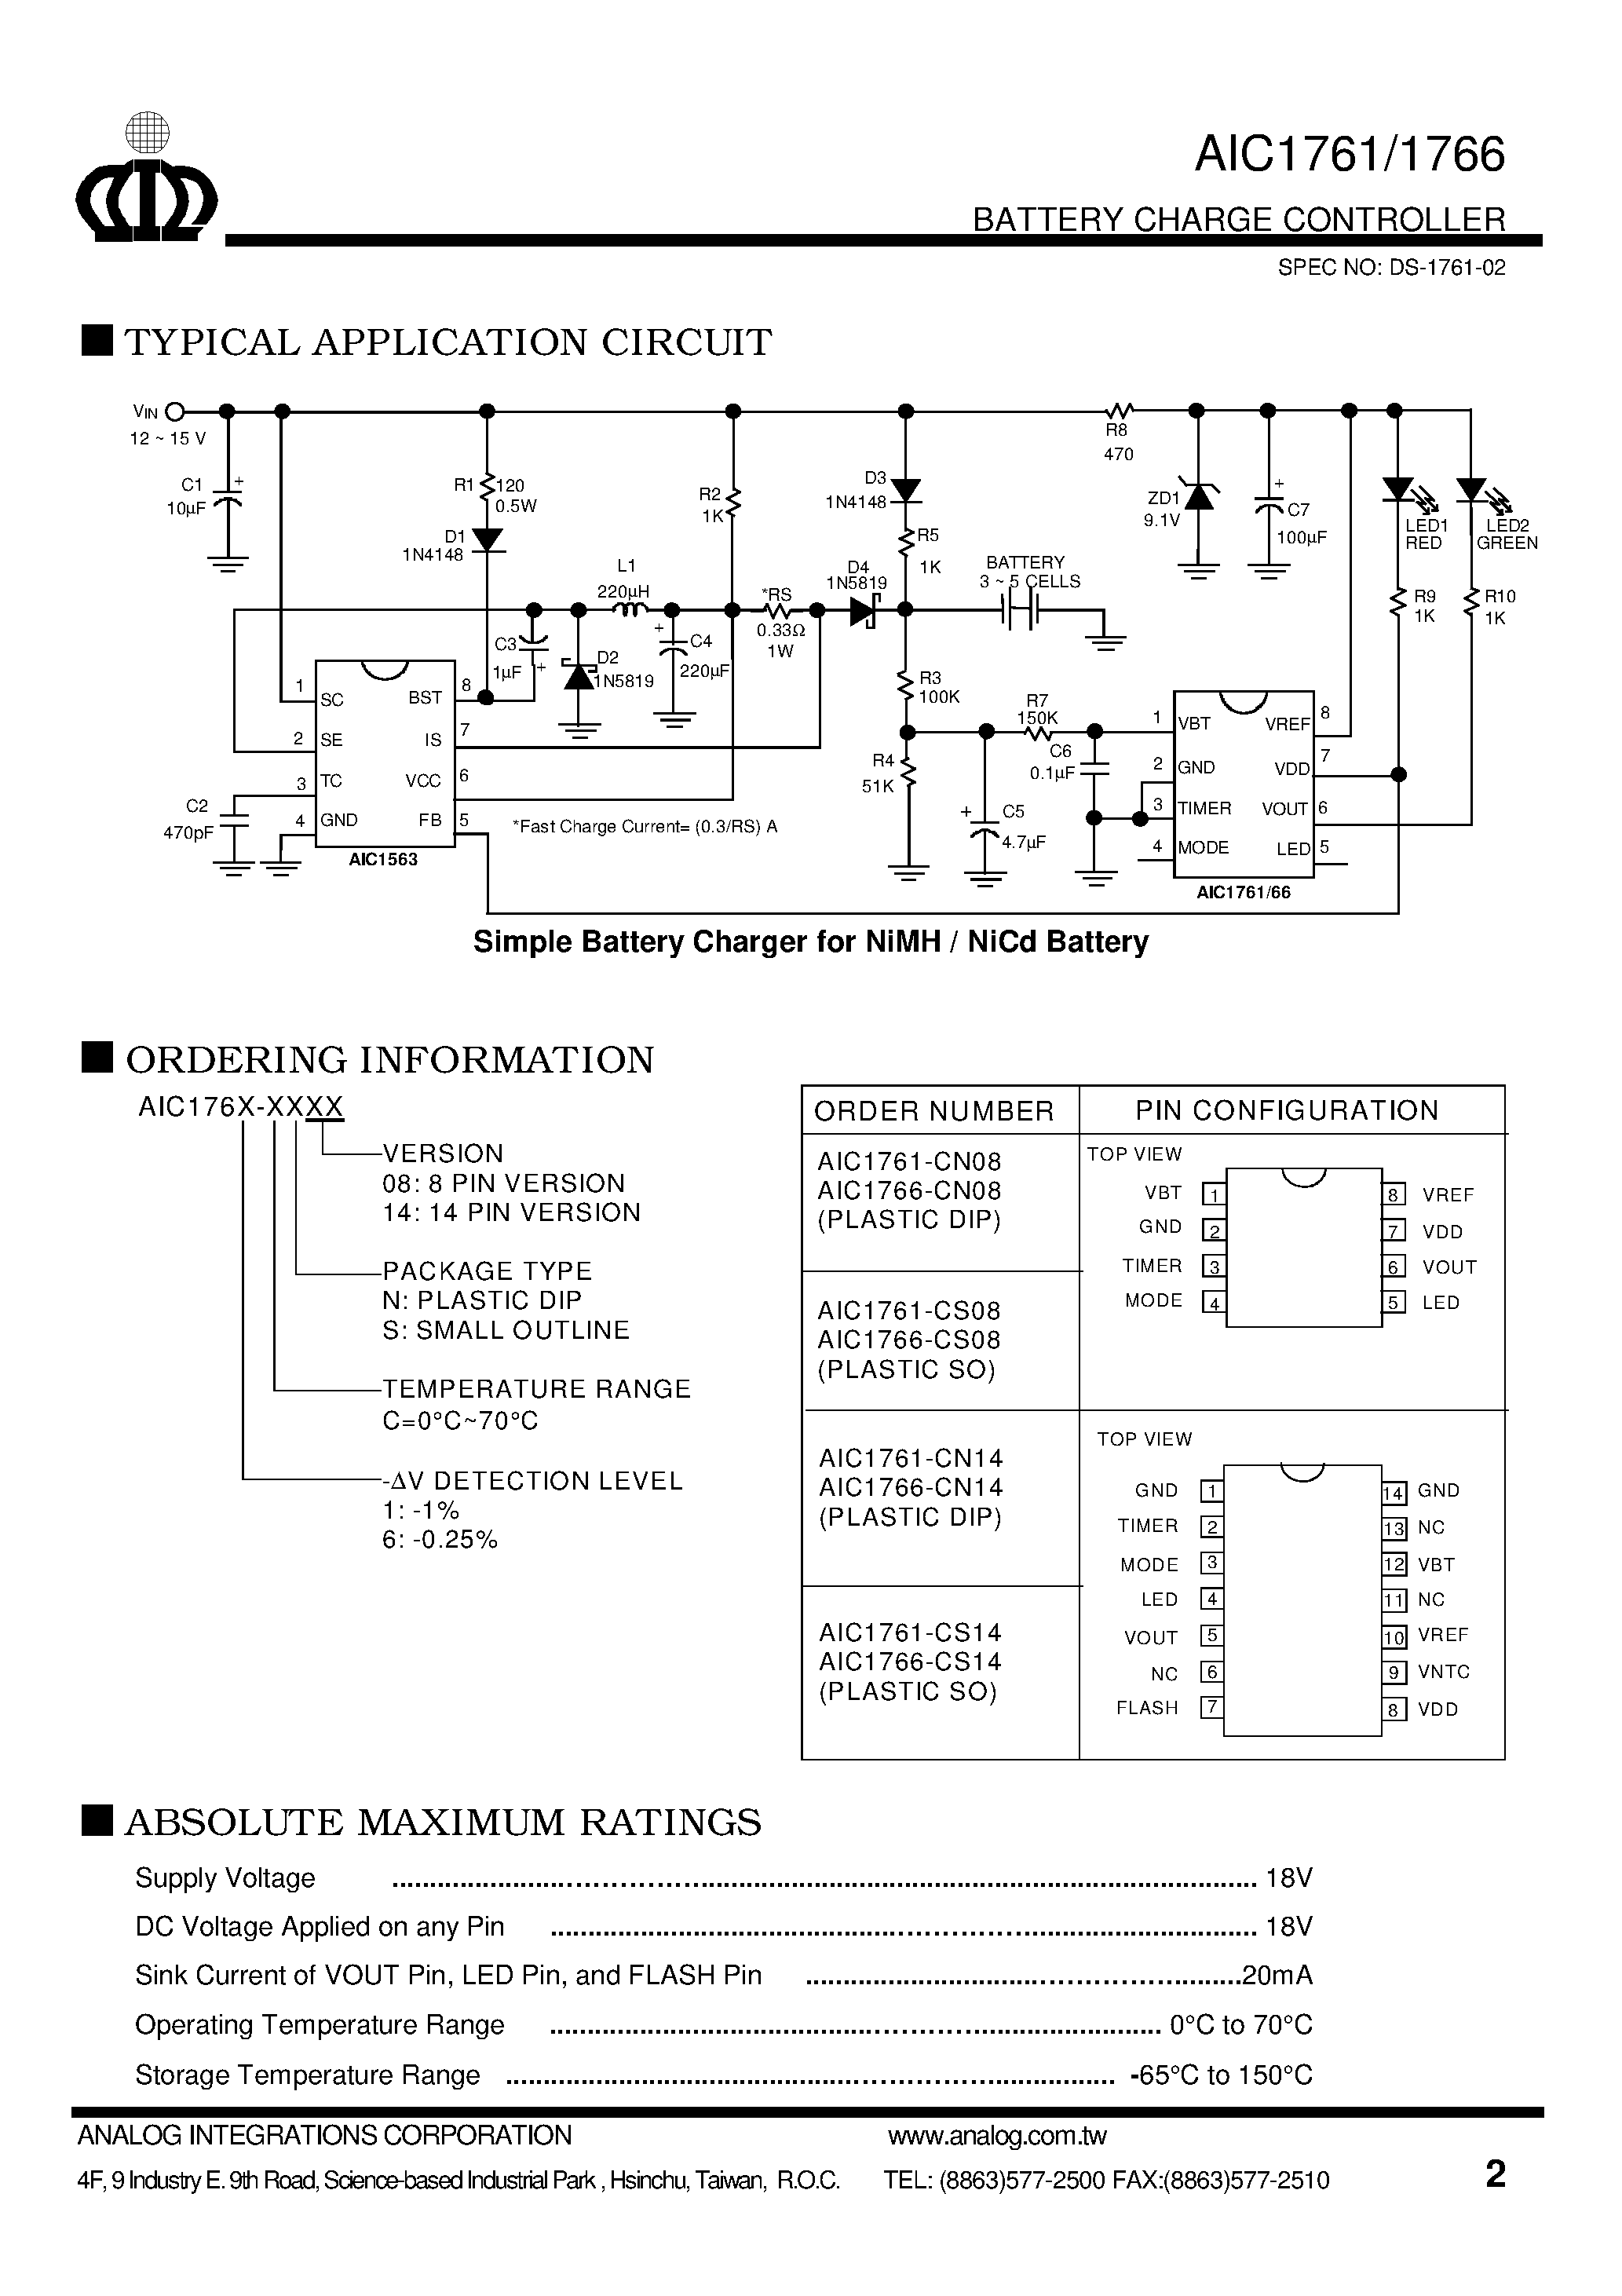 Datasheet AIC1766-CS14 - BATTERY CHARGE CONTROLLER page 2